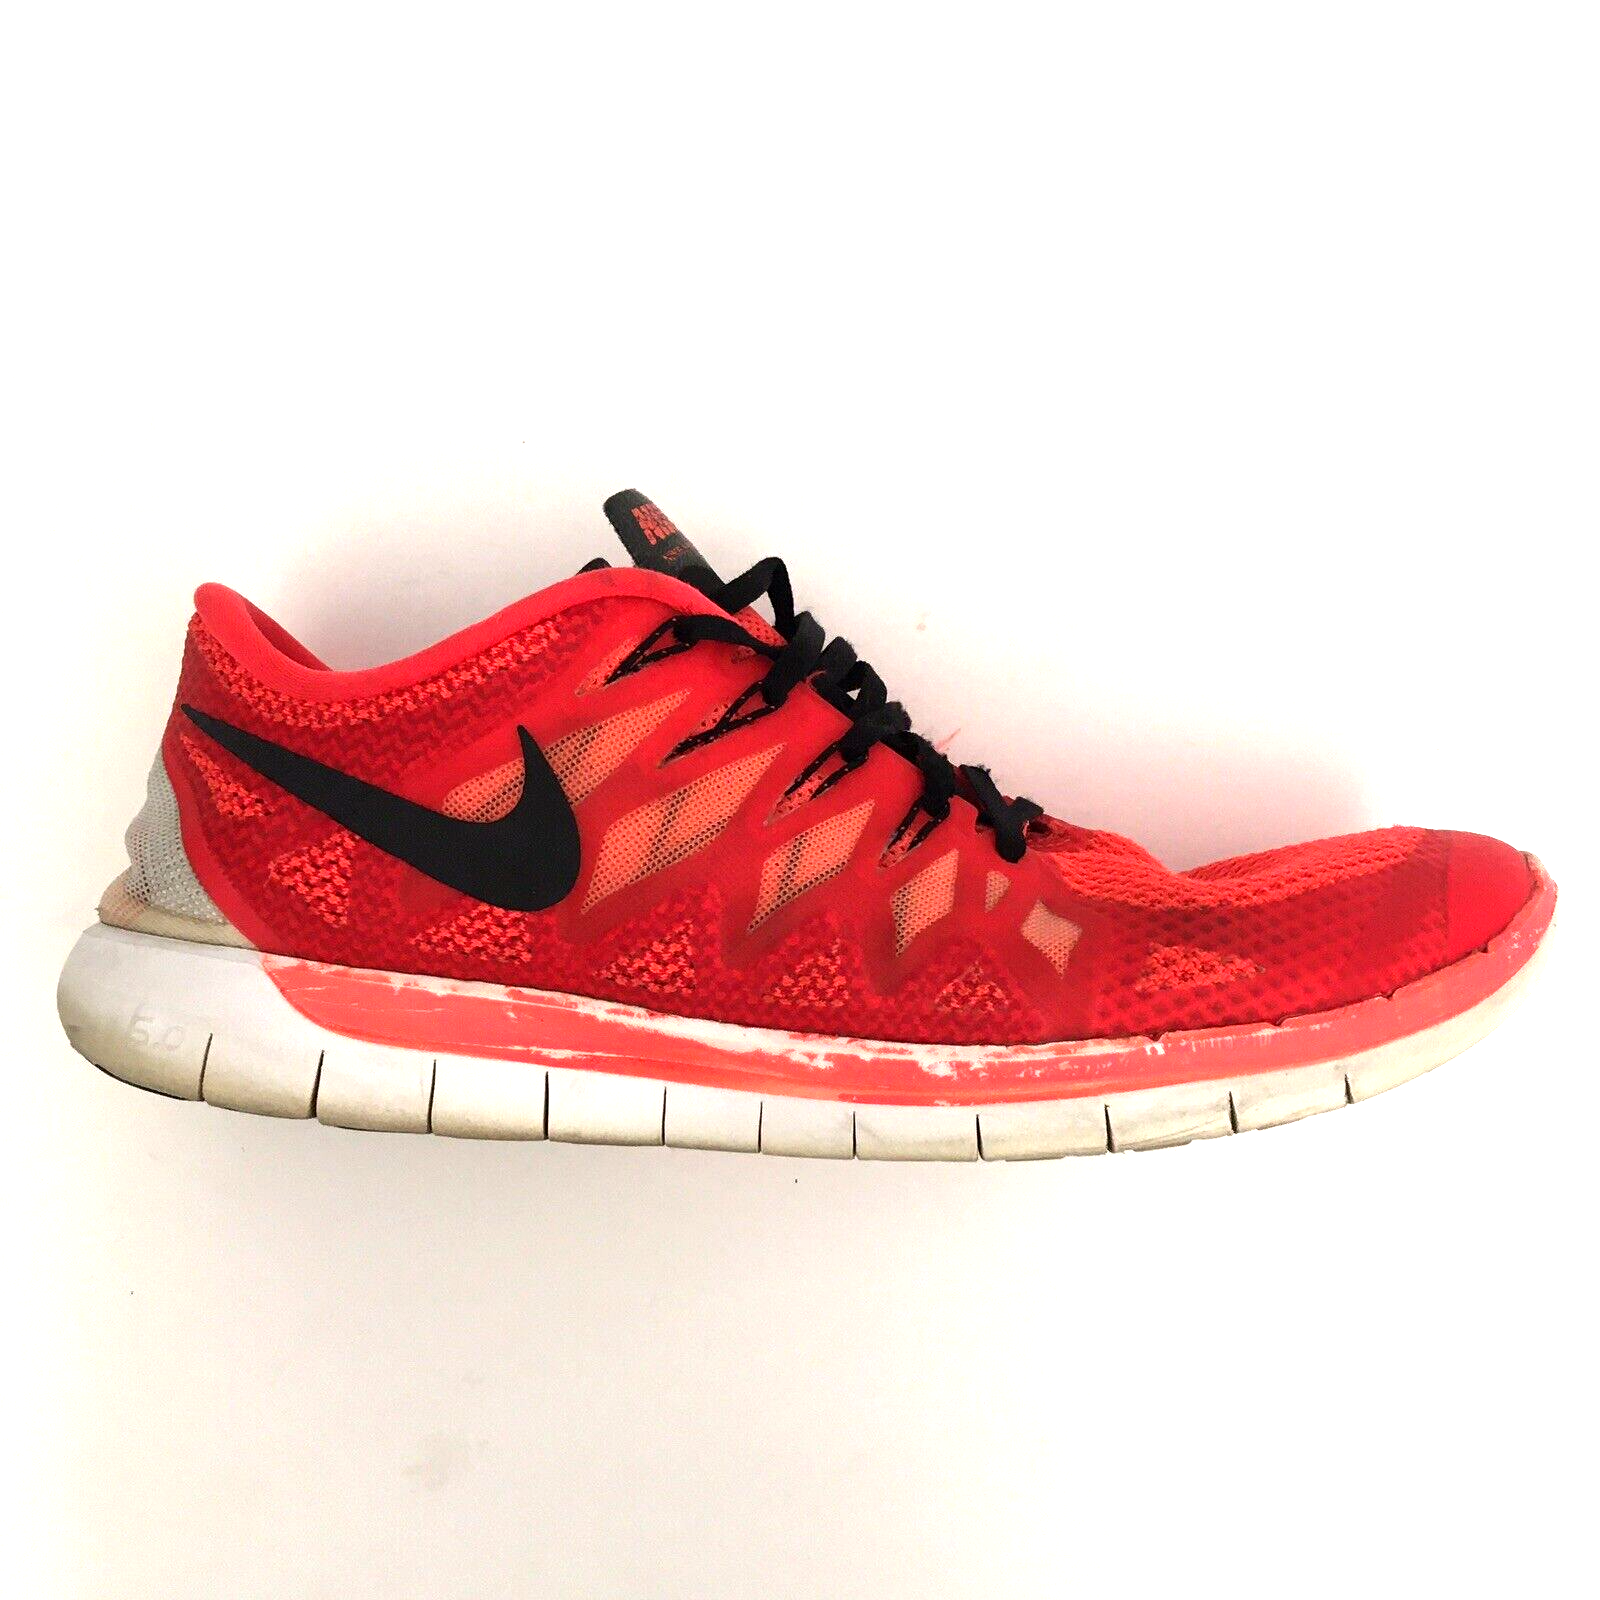 Nike Free 5.0 Shoes Mens Size 12.5 Running Athletic Mesh Low Sneakers | eBay